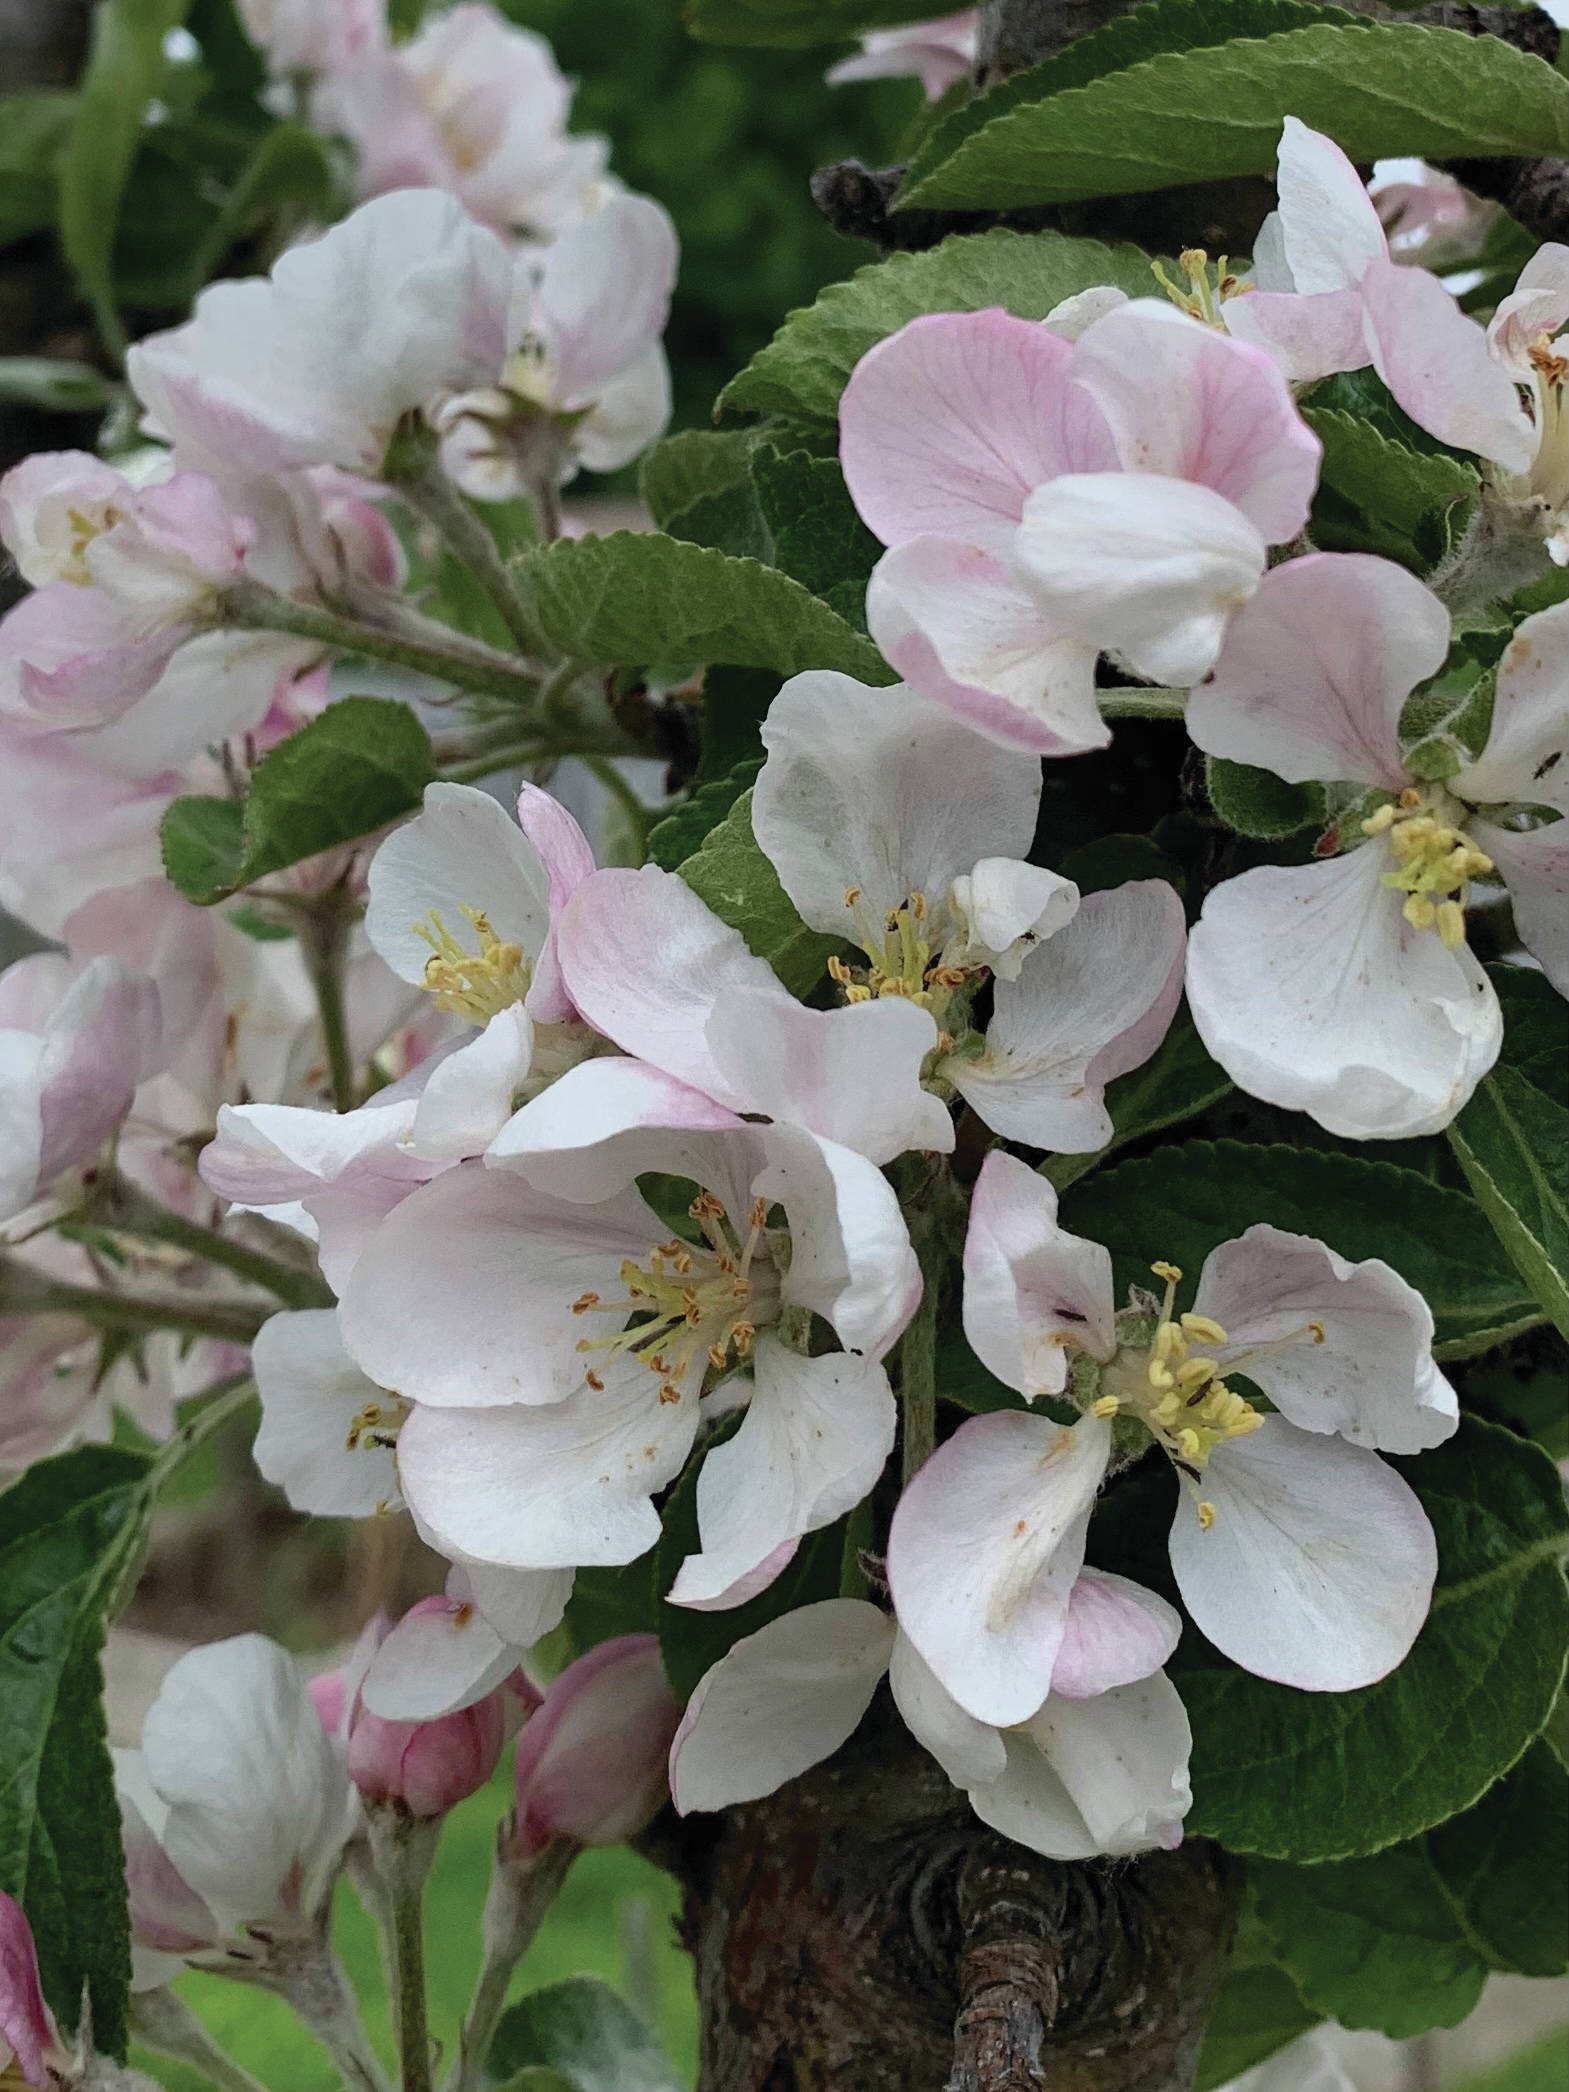 Apple blossoms on the North Pole columnar apple tree — lovely as well as promising. (Photo by Rosemary Fitzpatrick)